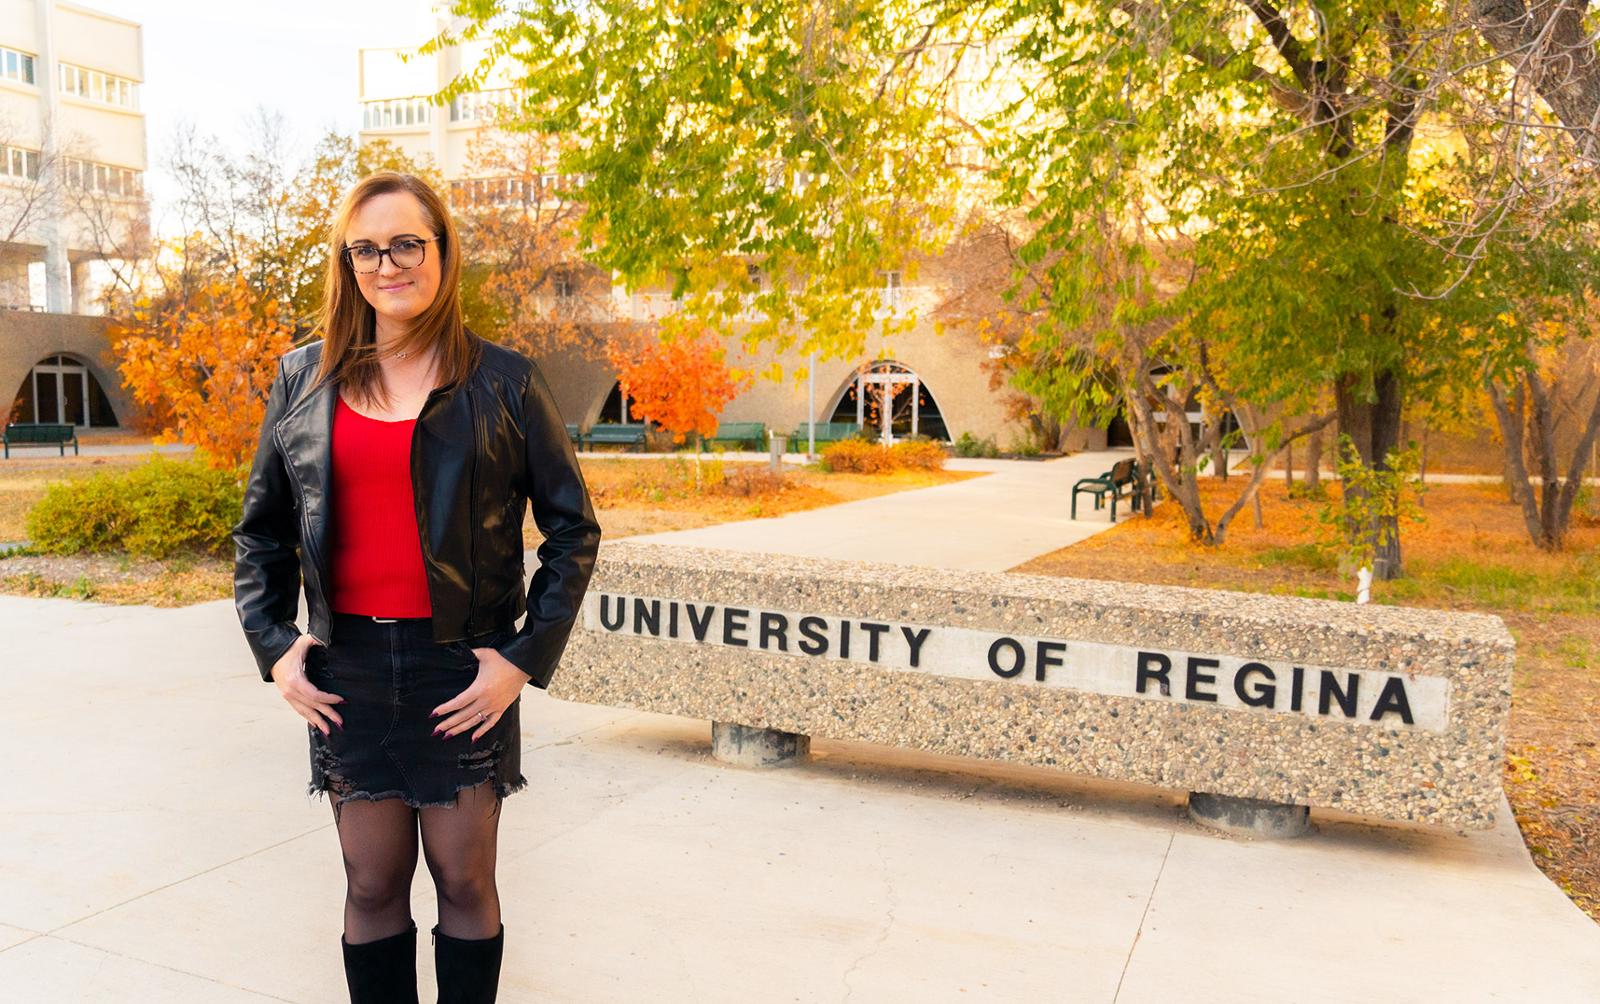 A professor stands in front of the secondary University of Regina sign on campus.